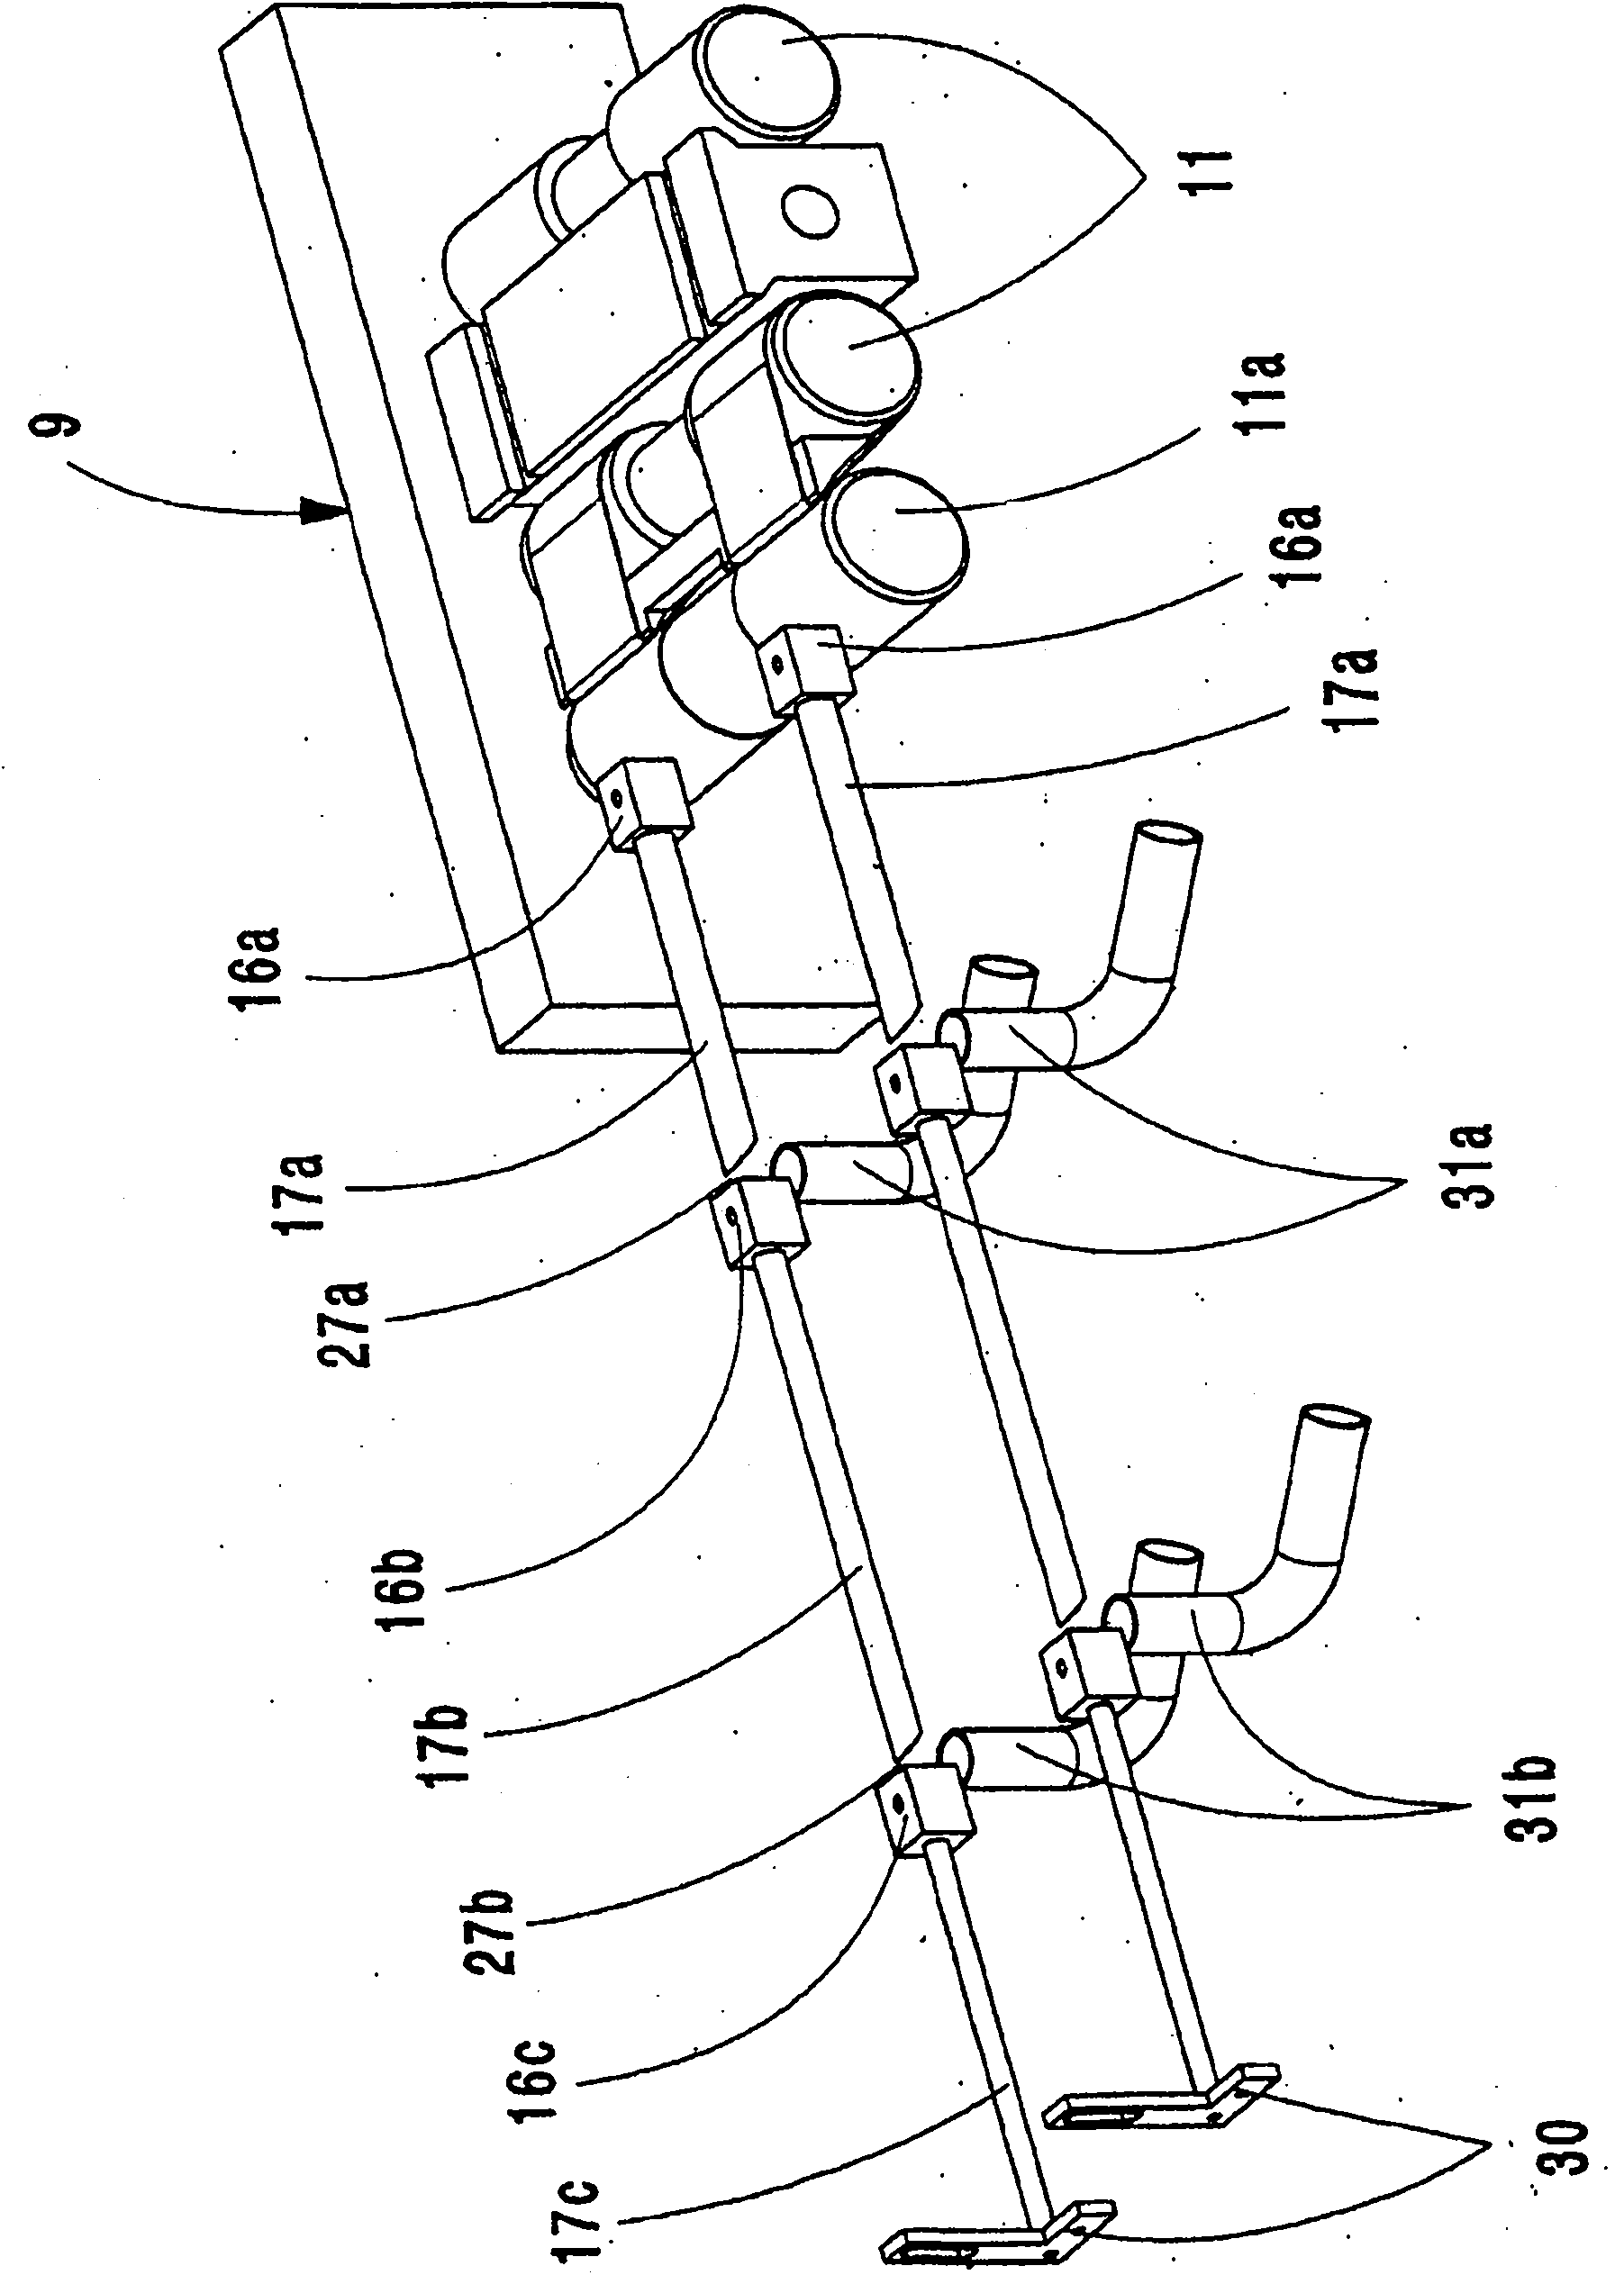 Apparatus for transporting fibre material between a drafting arrangement and a mesh-forming machine, and circular knitting machine equipped with said apparatus